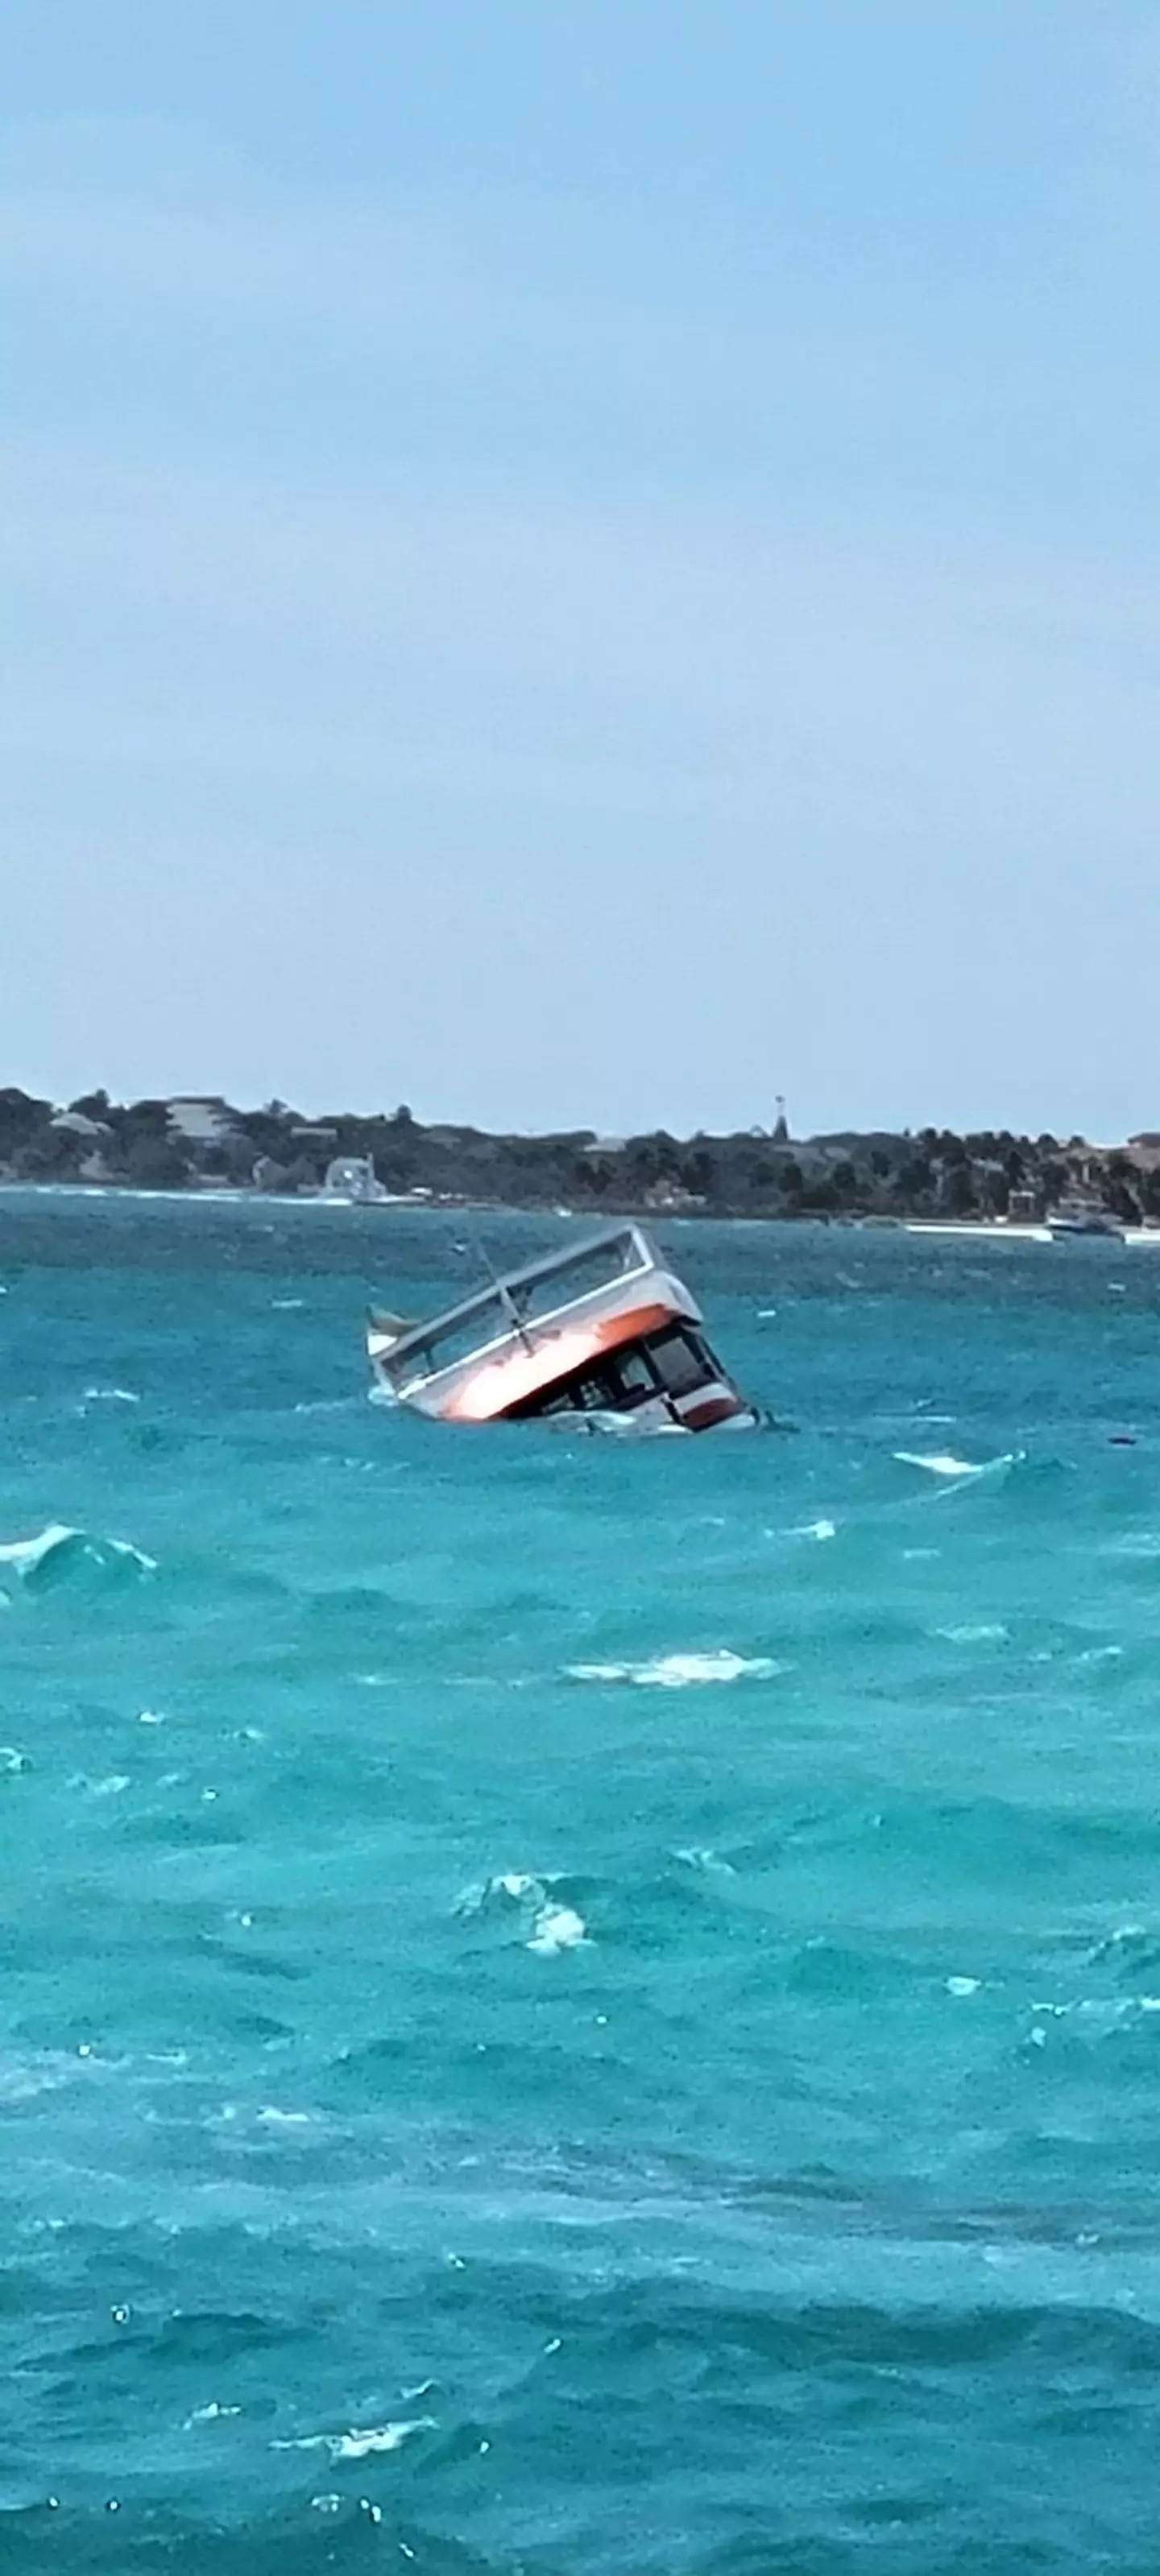 The excursion capsized after hitting some rough waves.